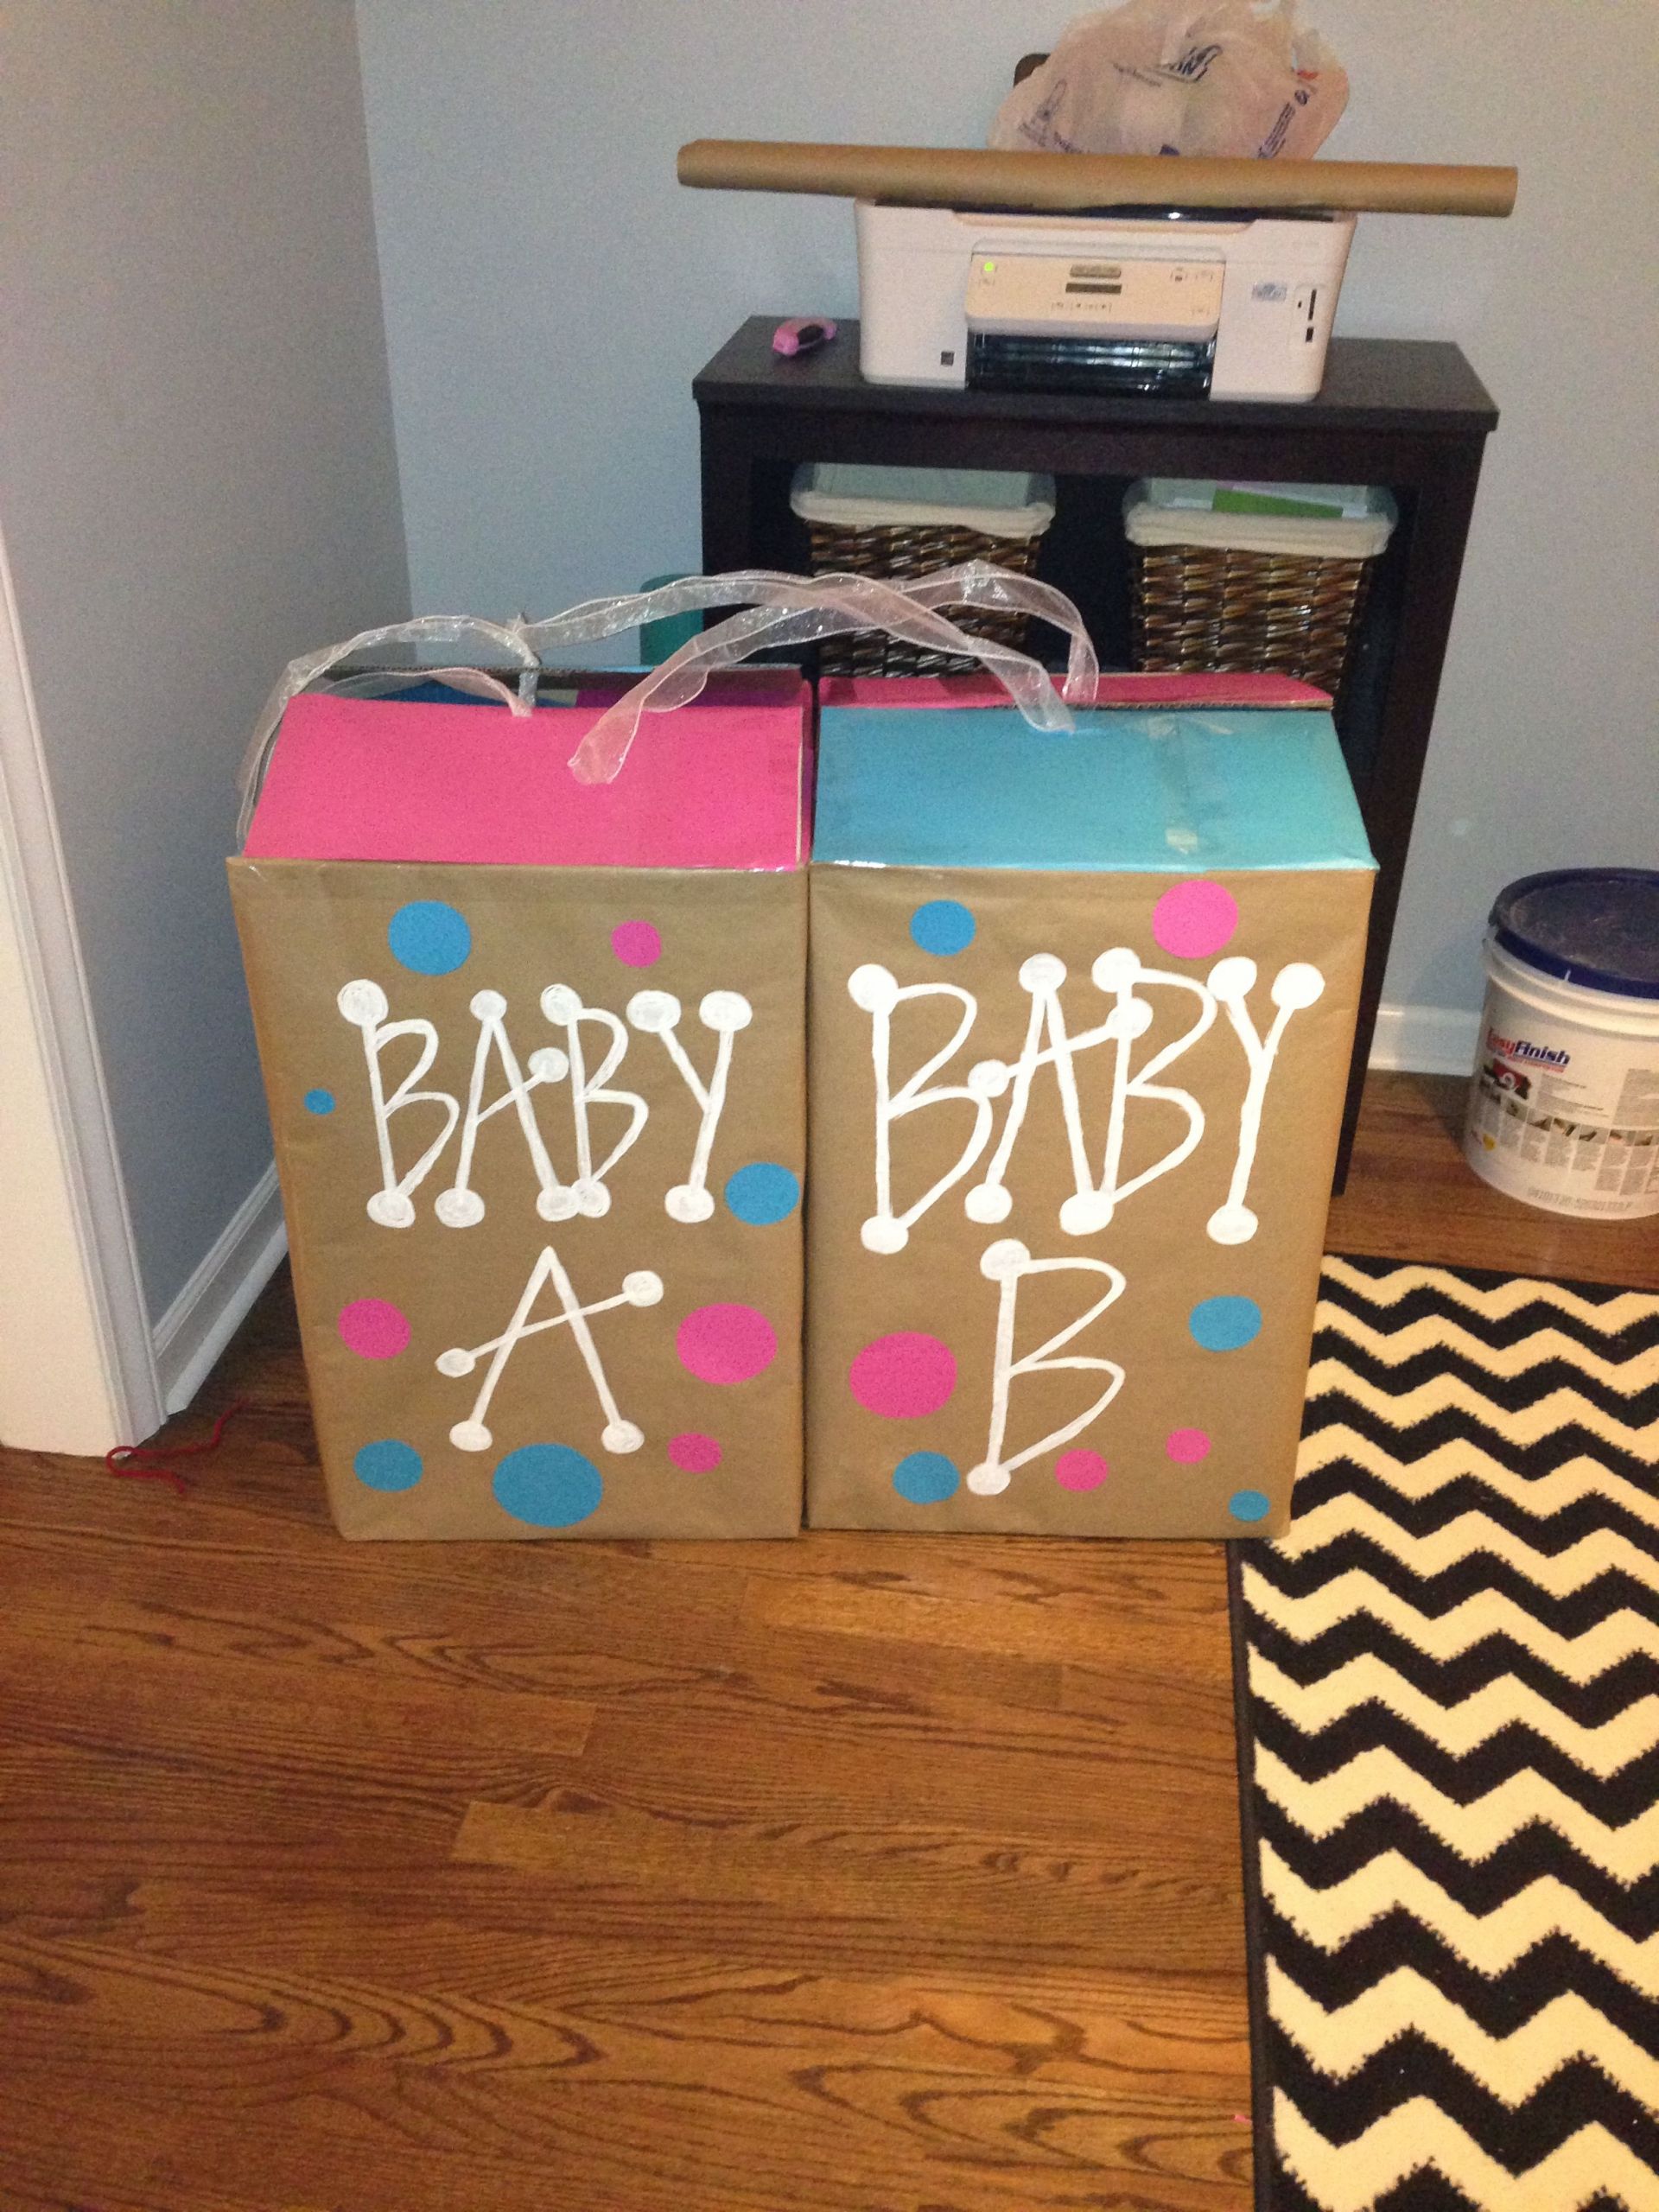 Gender Reveal Party Ideas Twins
 Baby a and baby b gender reveal boxes For twins